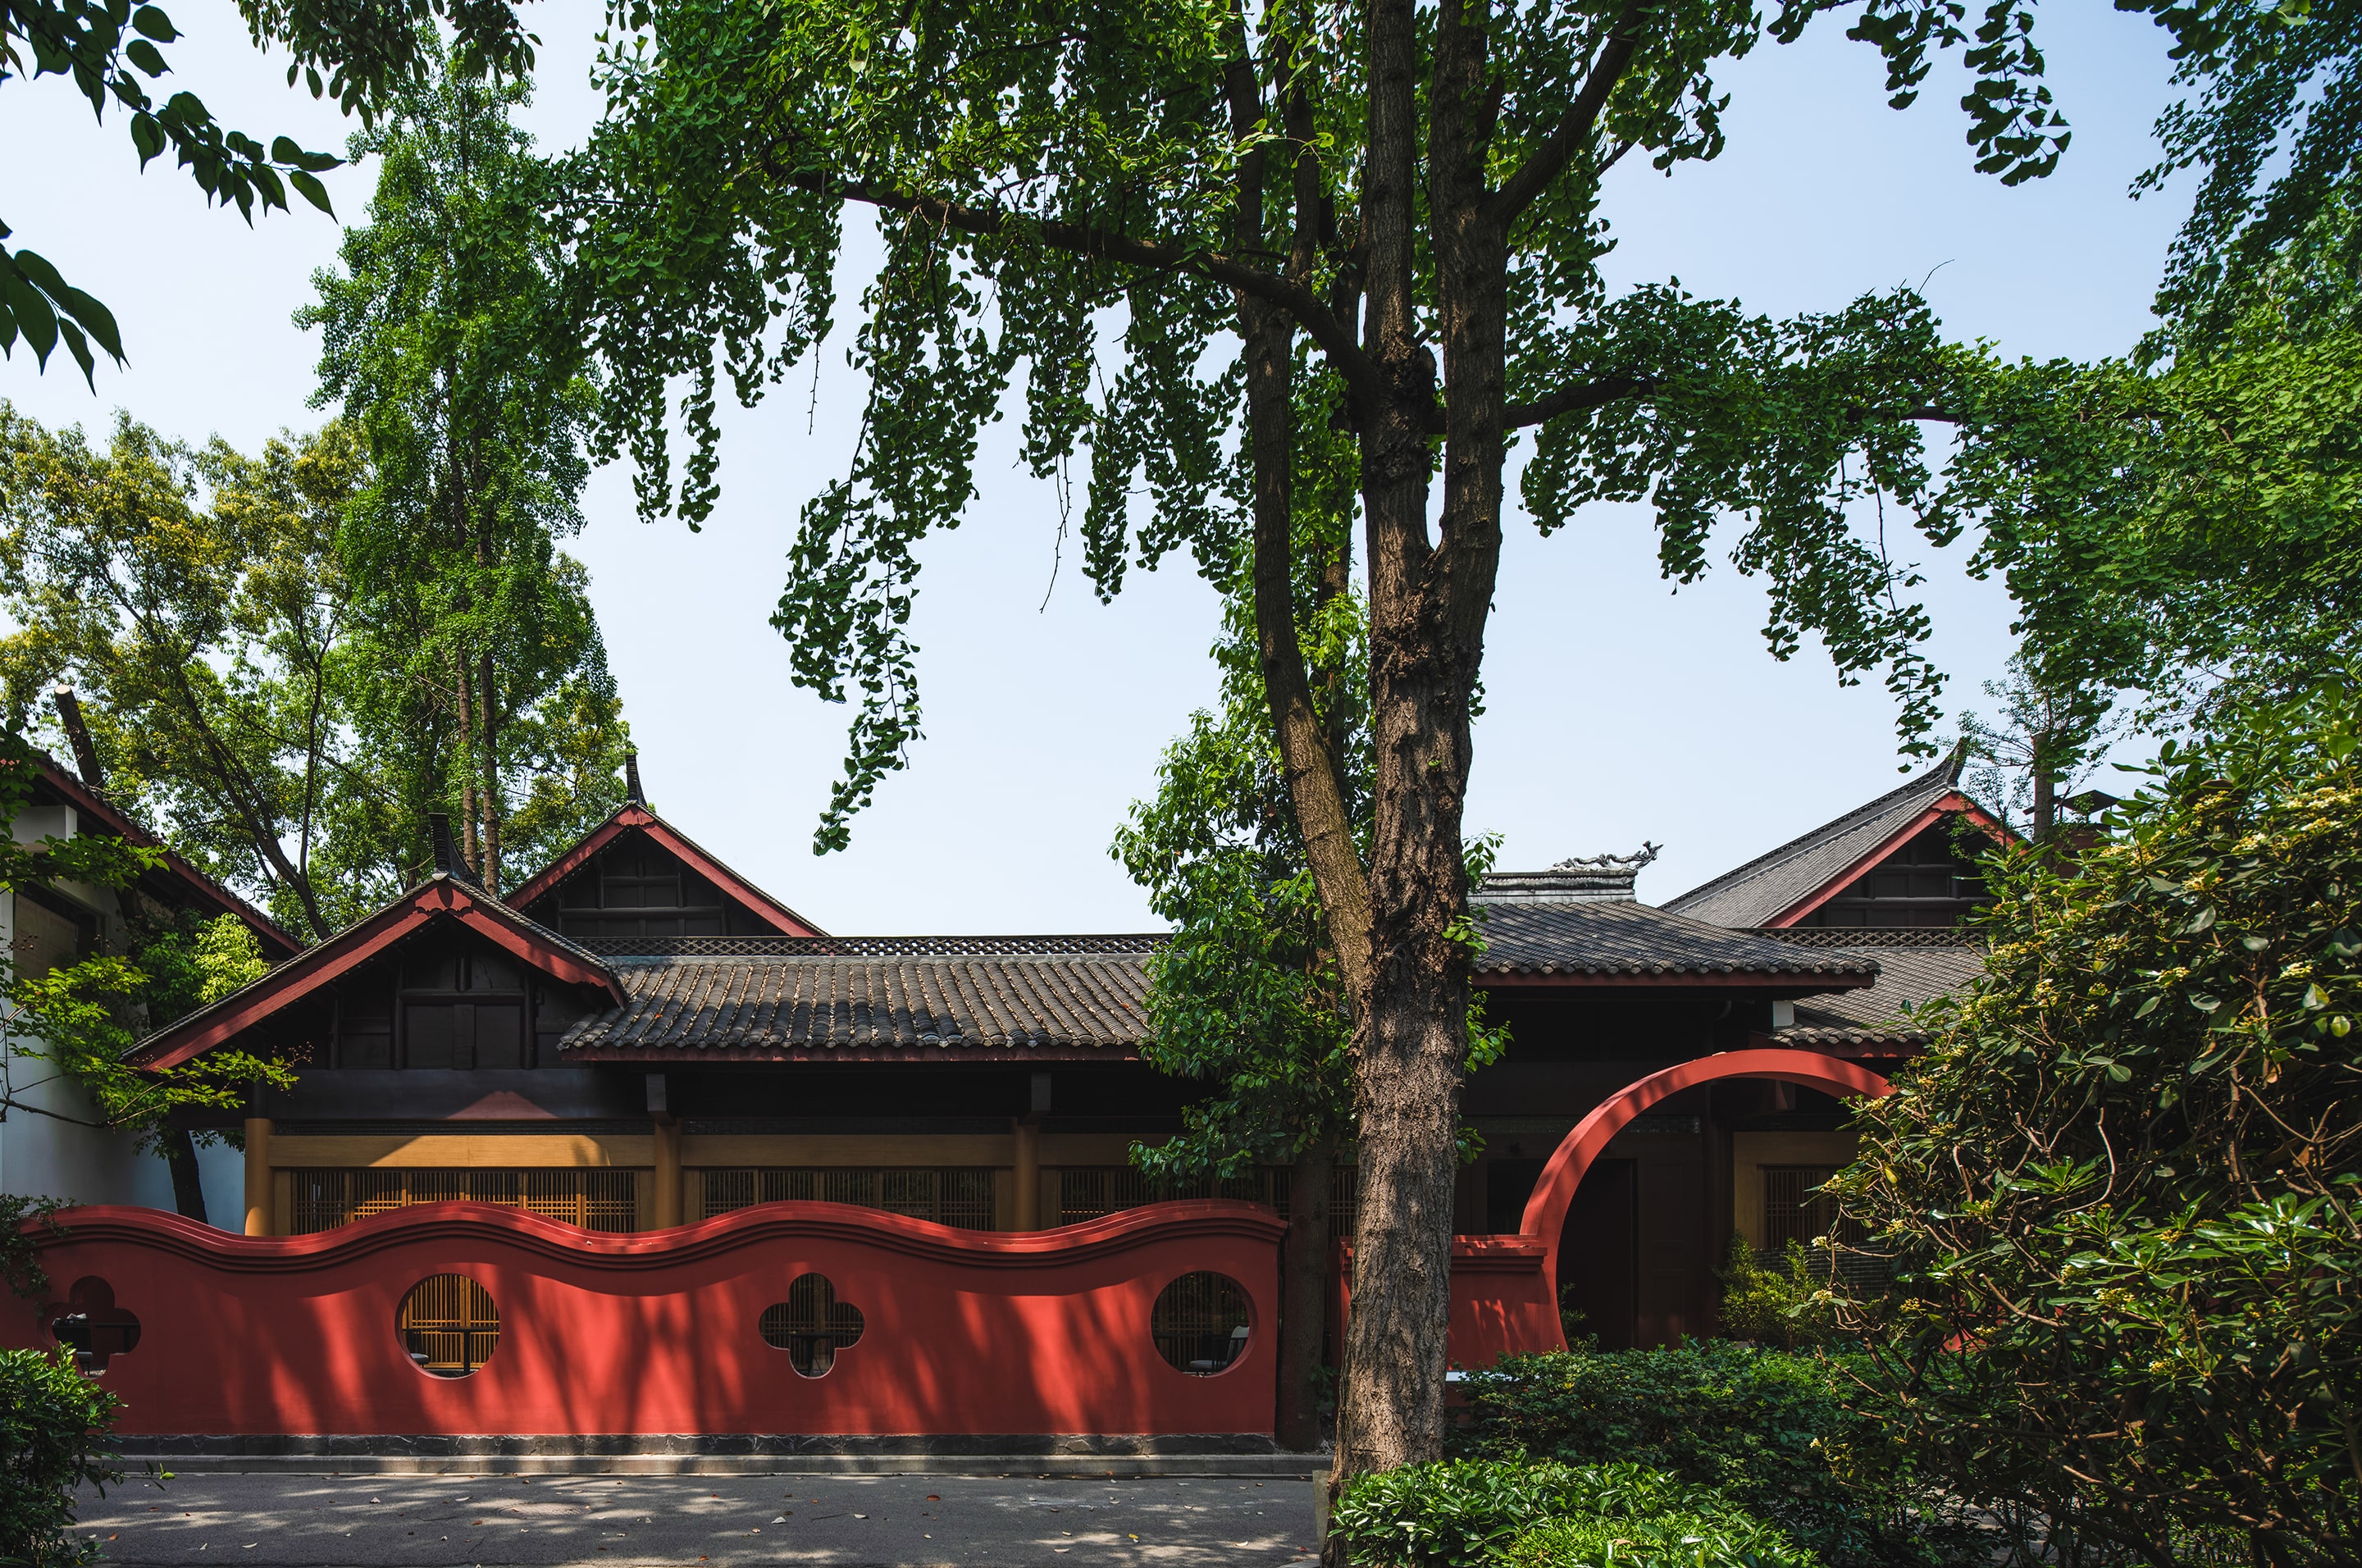 View of Kuansan Town Restaurant from the east side, from the Qingyang Palace